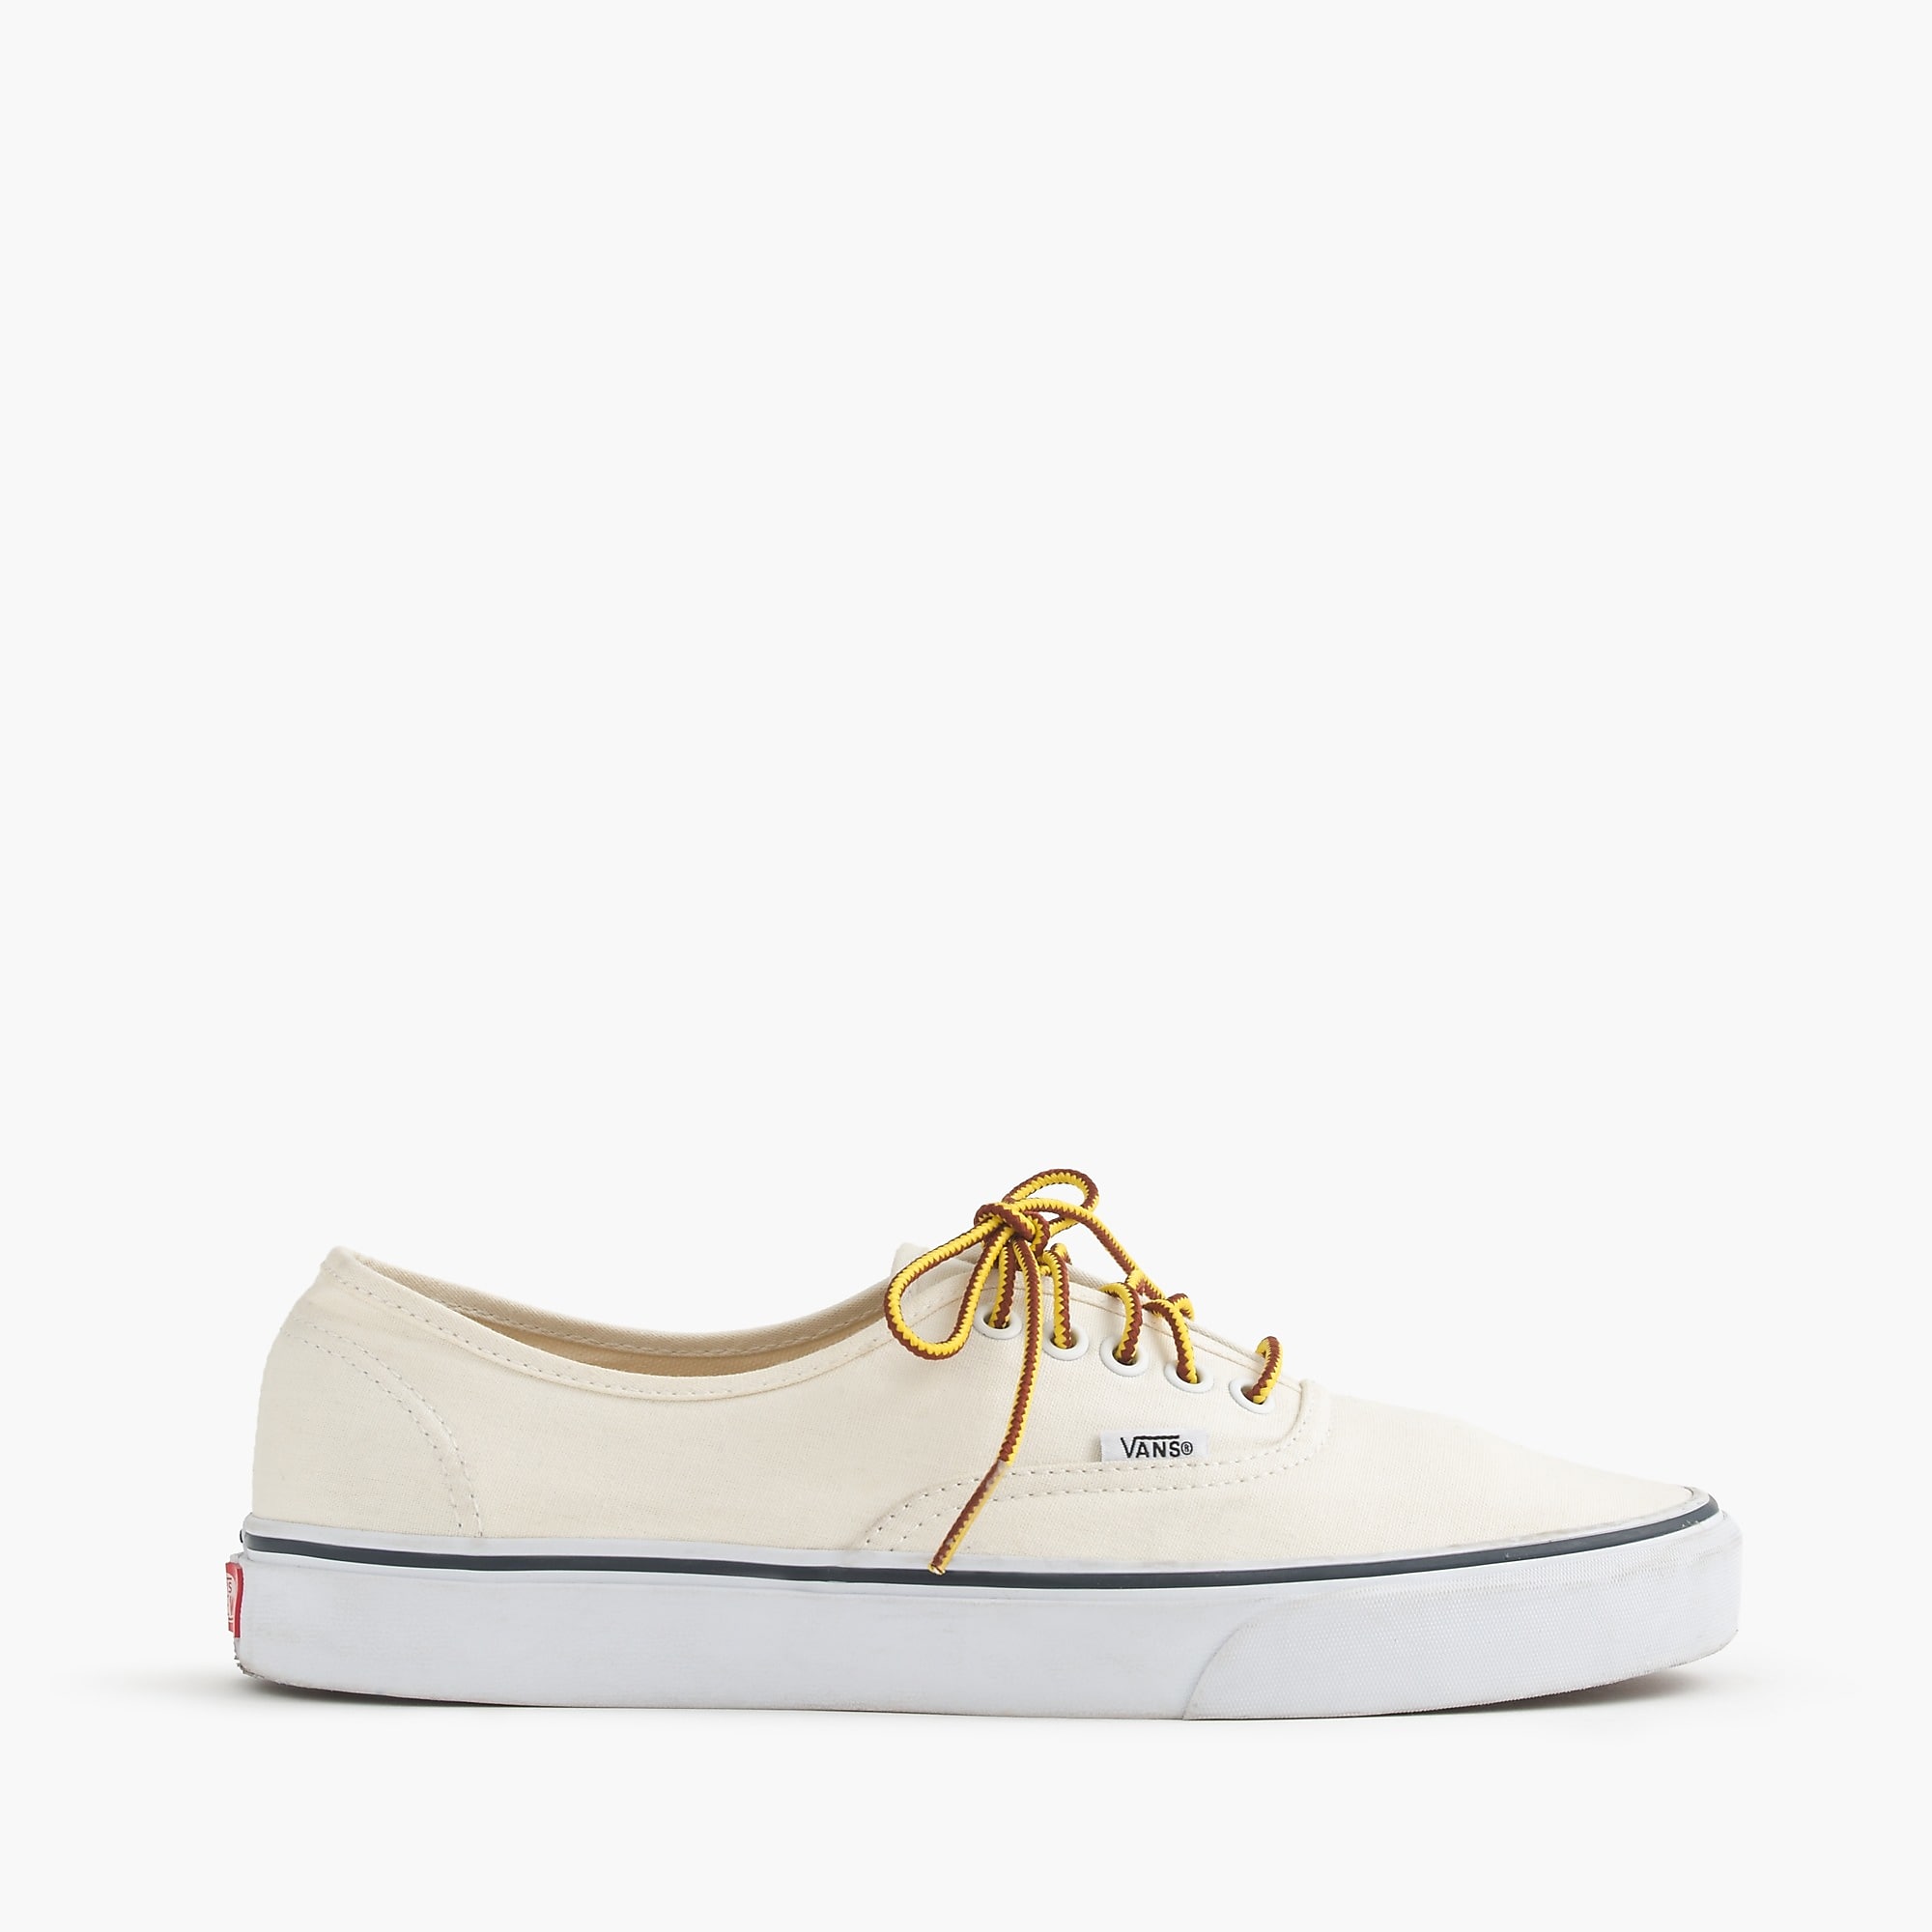 for J.Crew canvas authentic sneakers